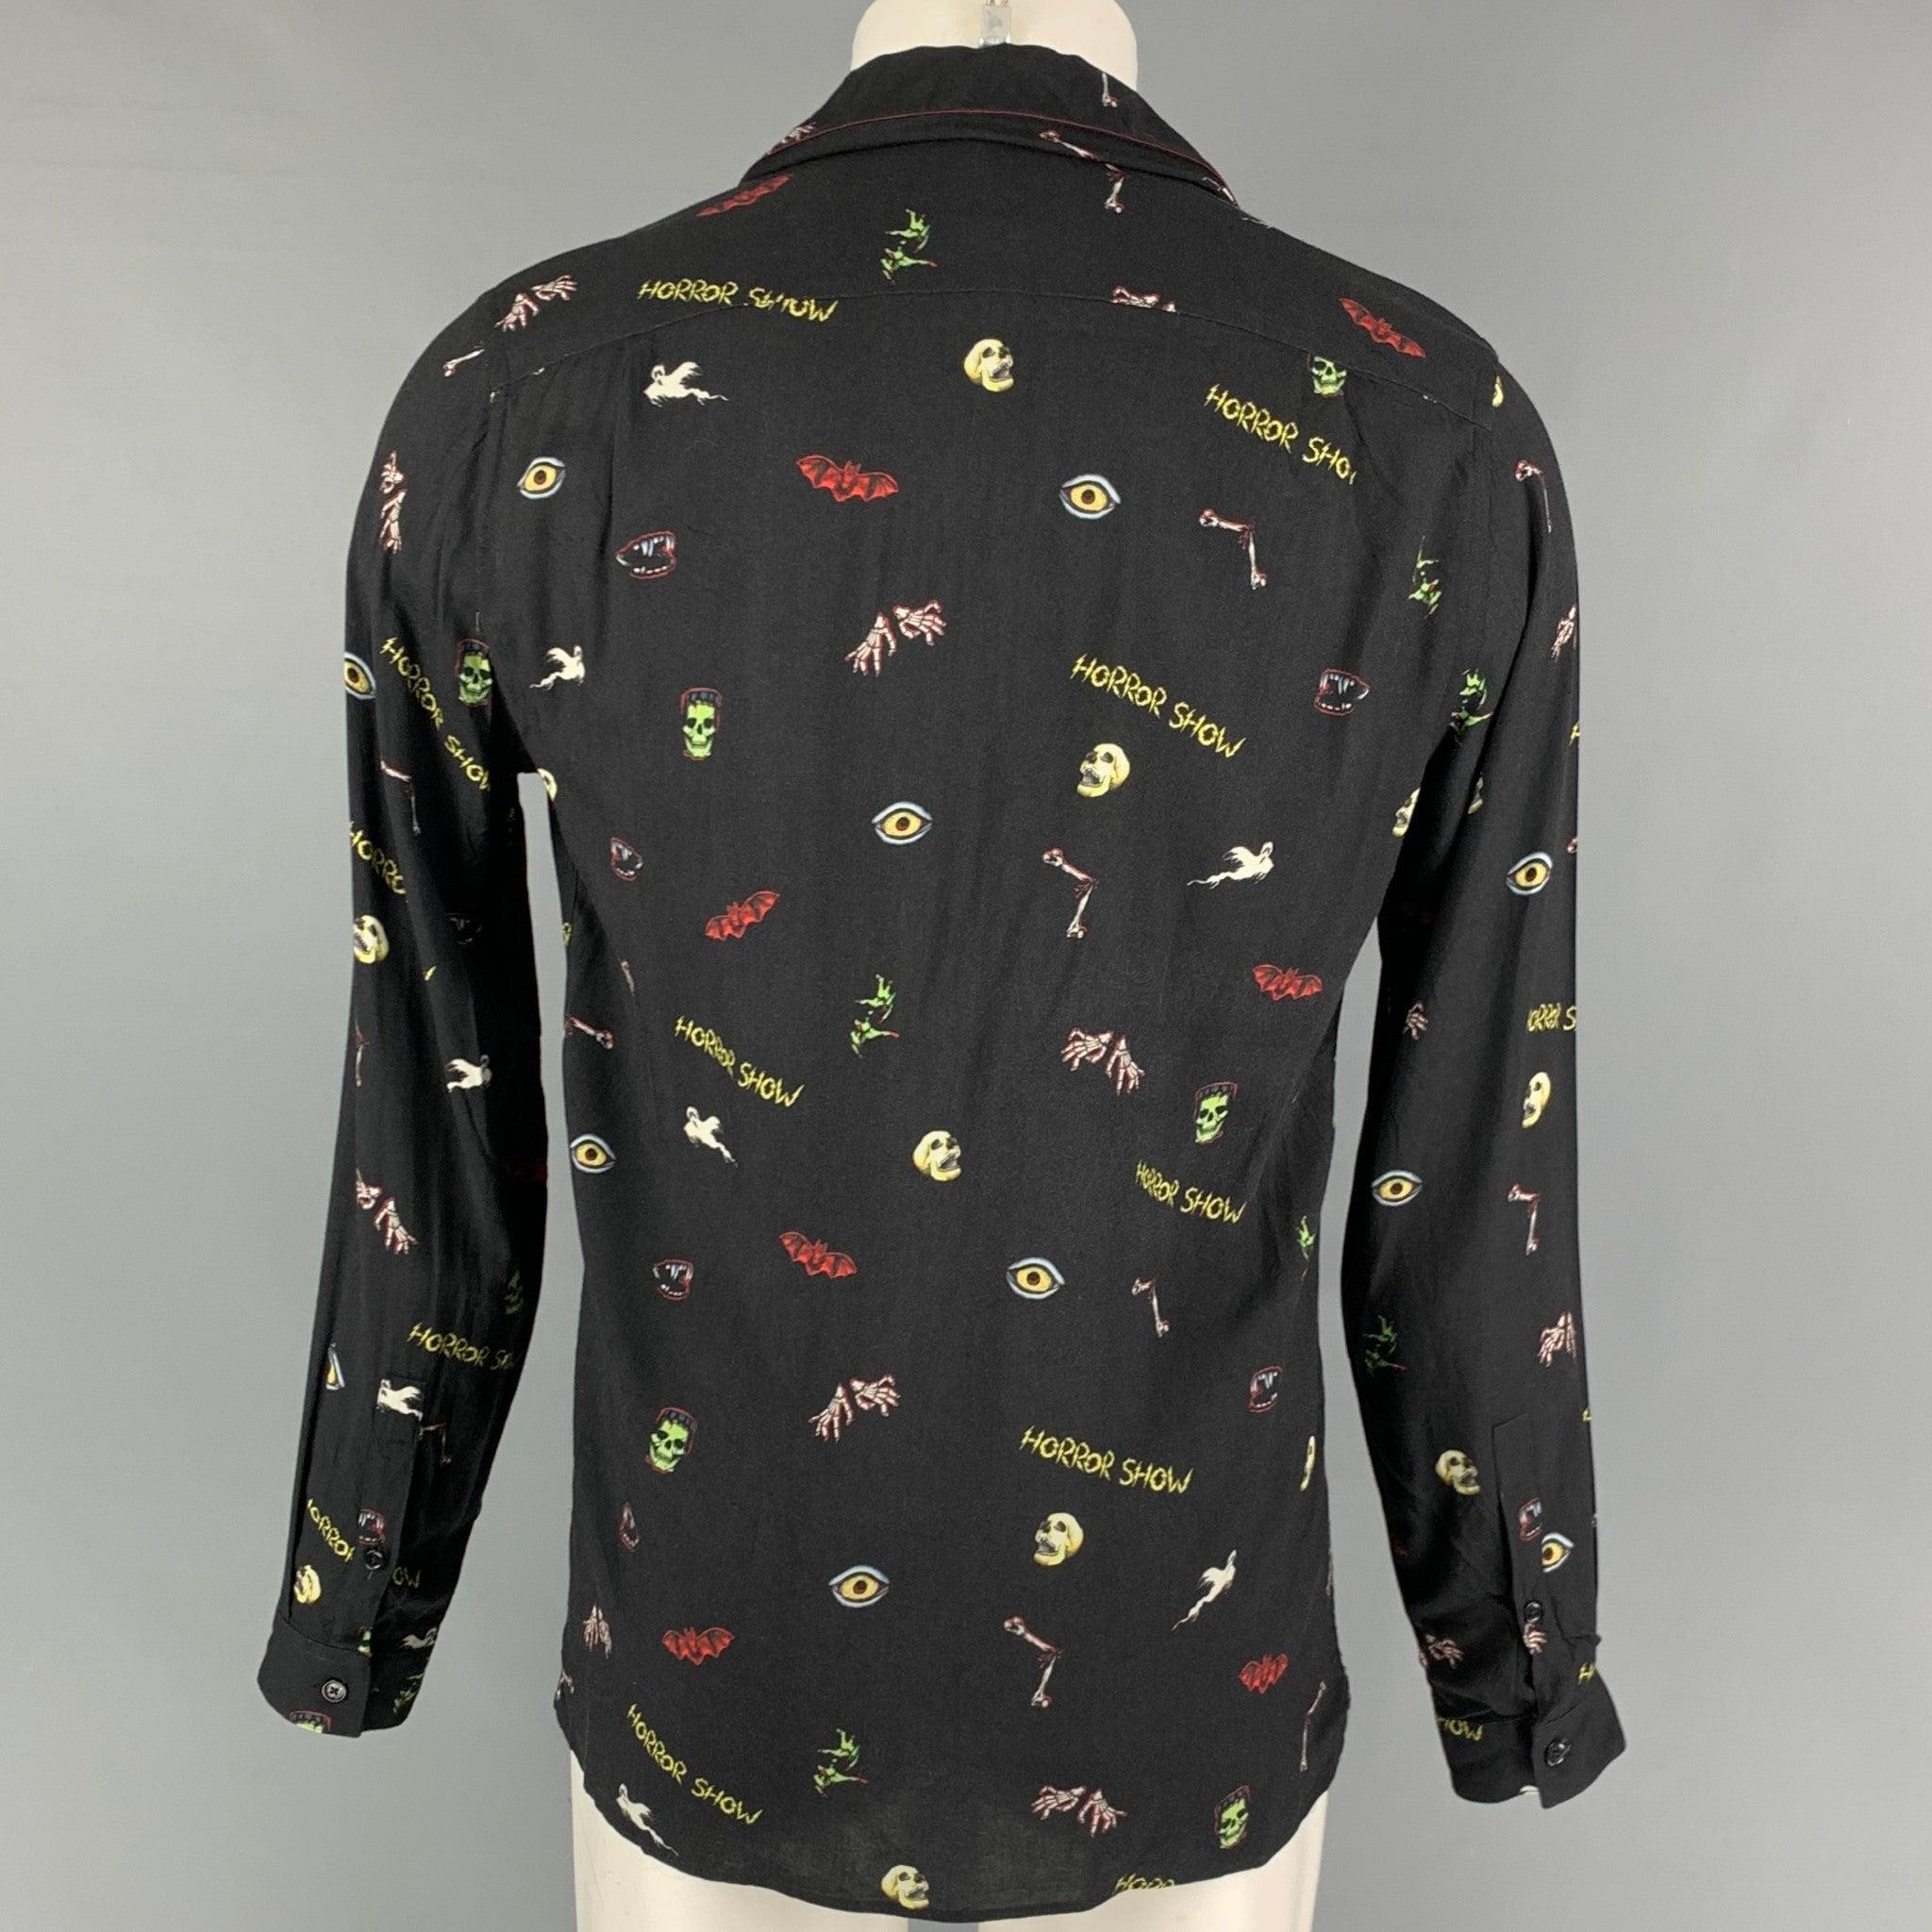 THE KOOPLES Size S Black Multi-Color Graphic Viscose Long Sleeve Shirt In Good Condition For Sale In San Francisco, CA